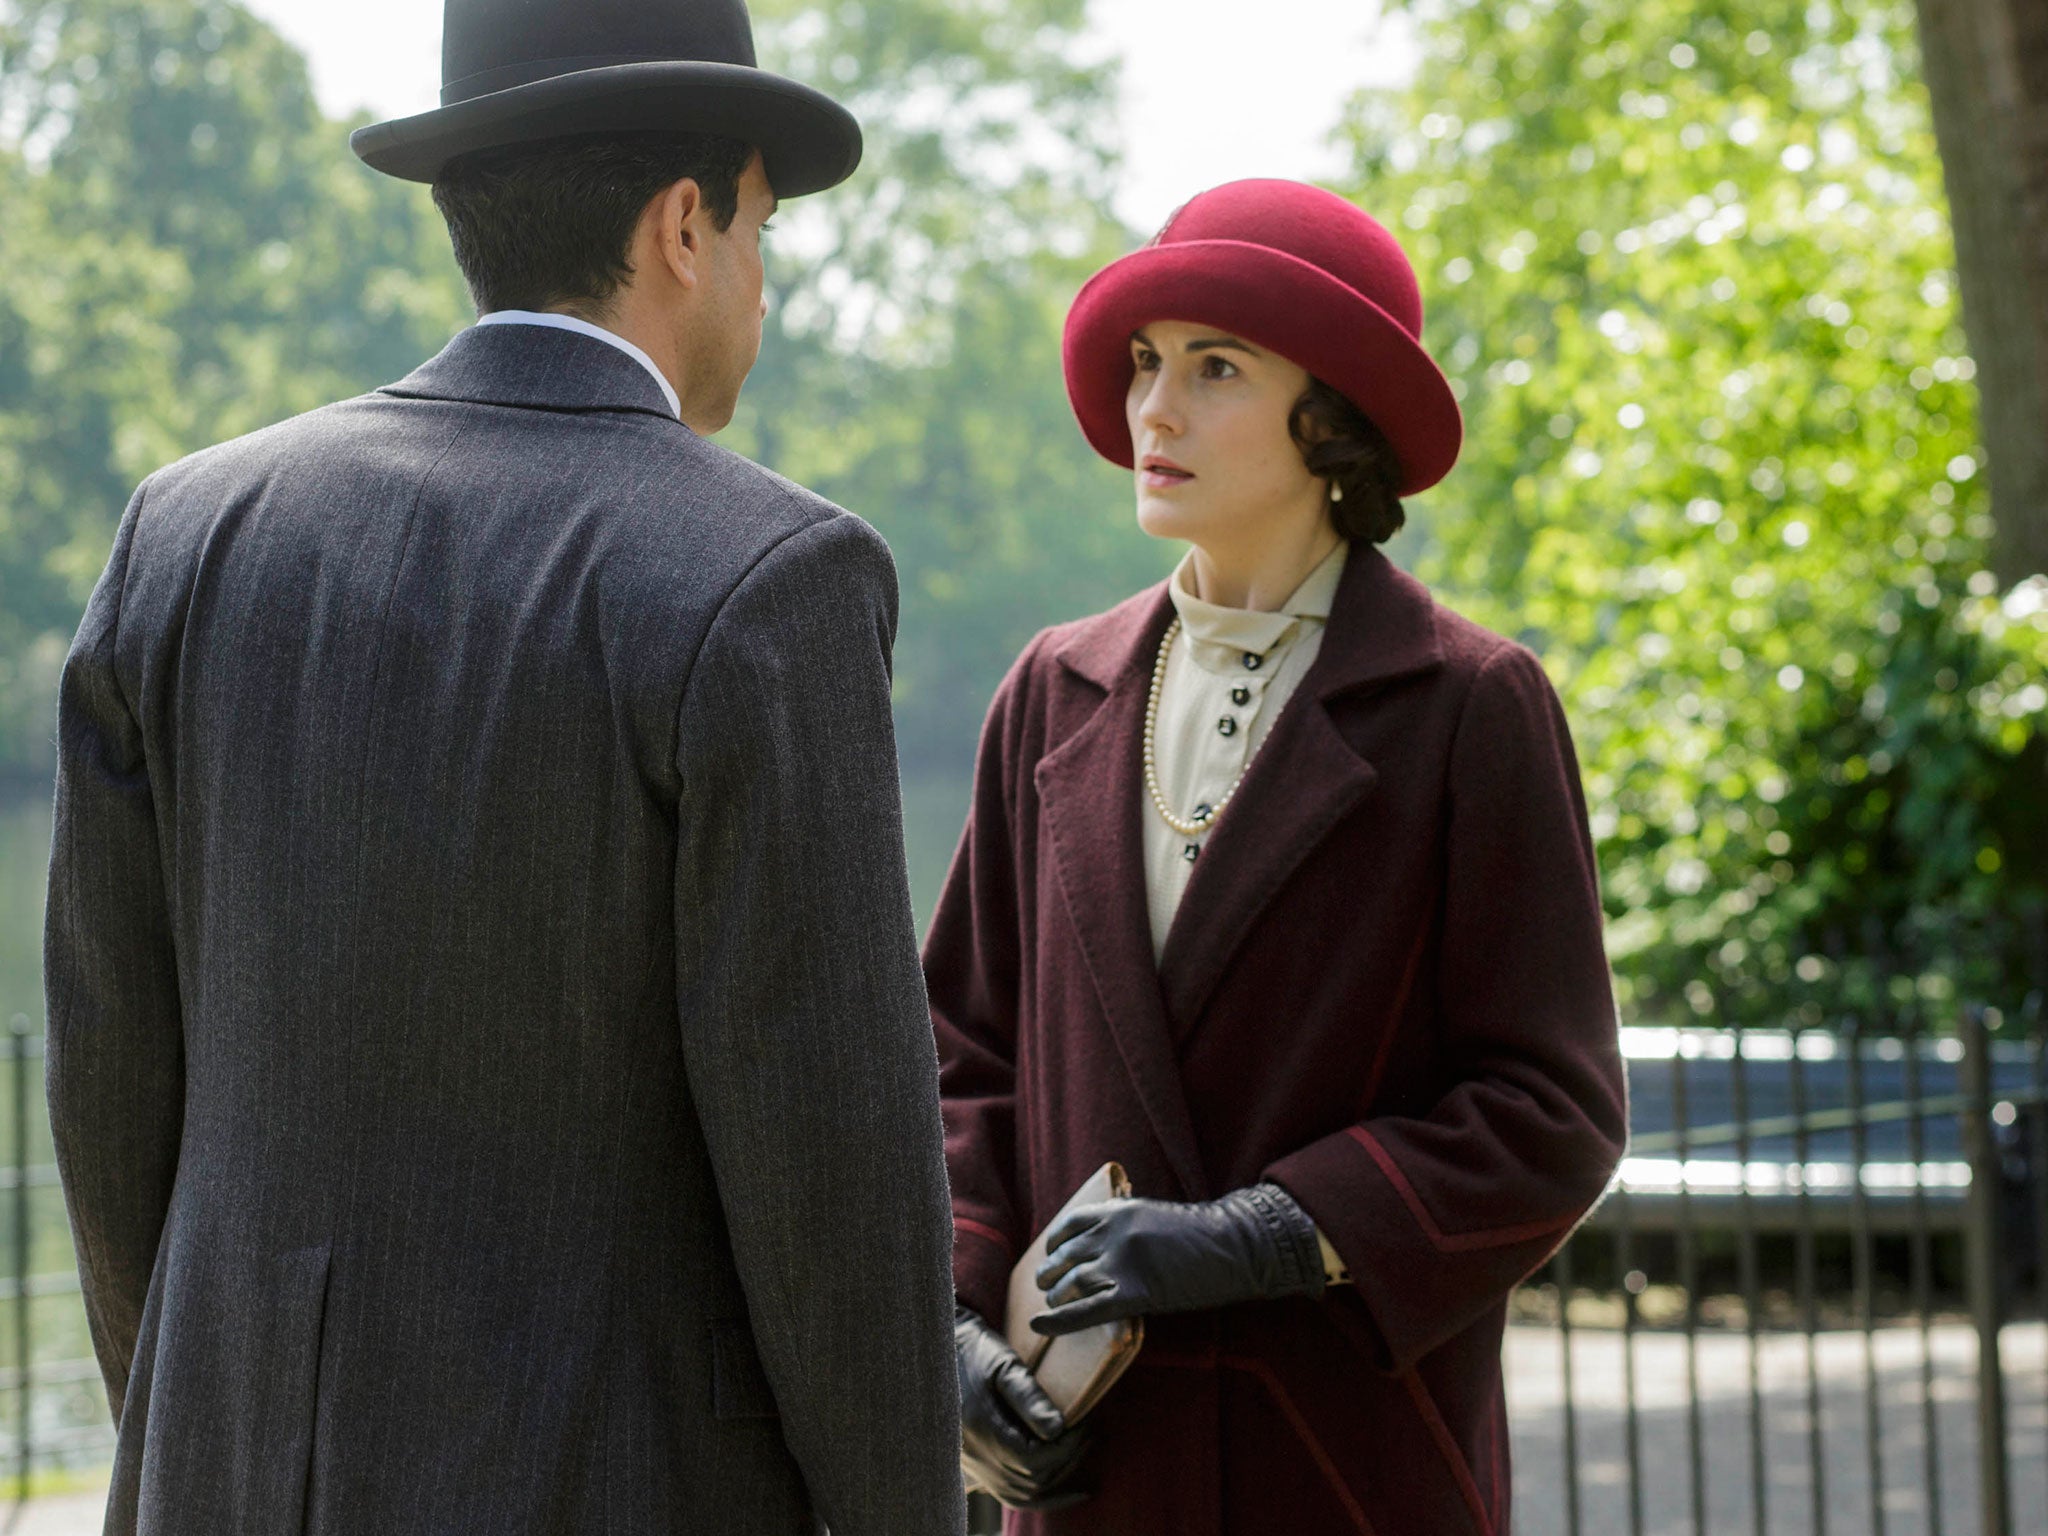 Lord Gillingham and Lady Mary seem to have a heated discussion in Downton Abbey series 5